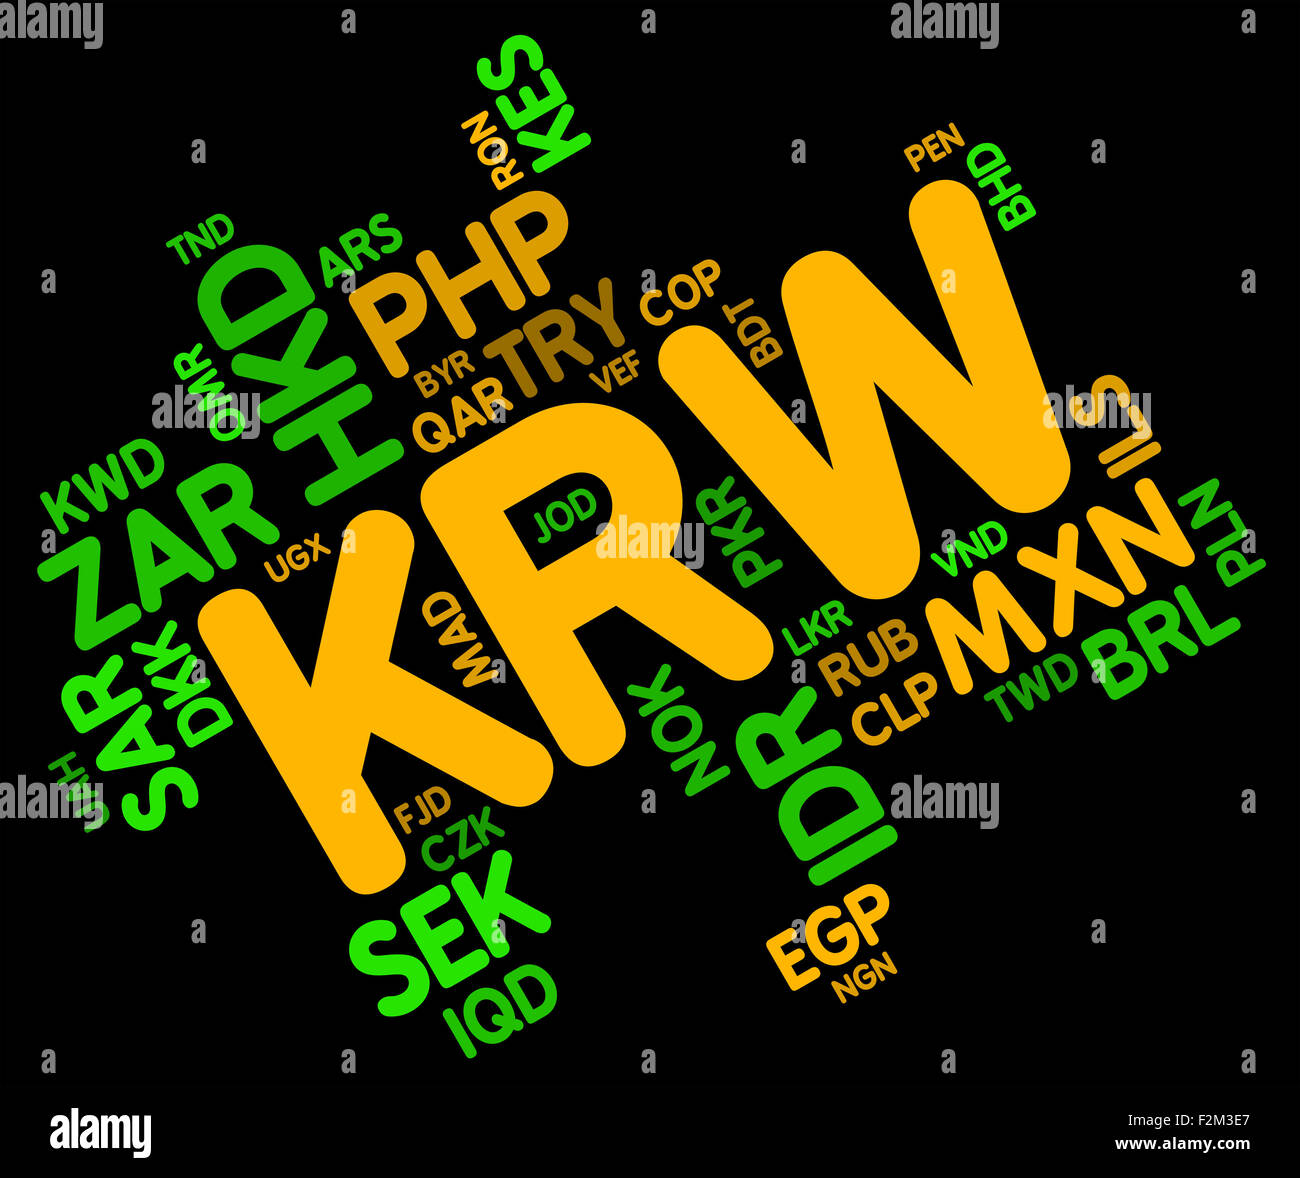 Krw Currency Meaning South Korean Wons And South Korean Wons Stock Photo